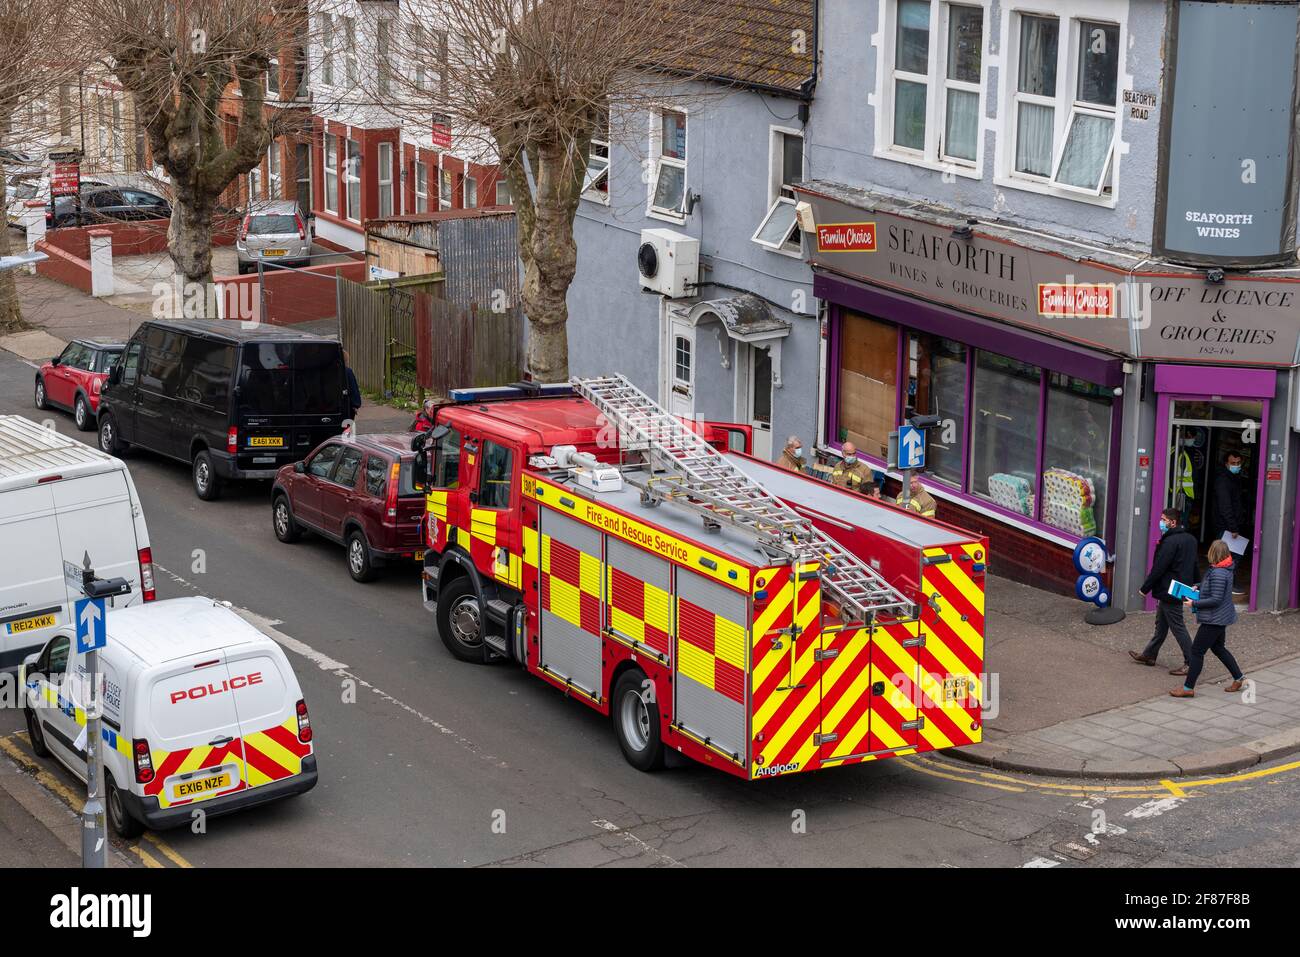 Emergency services in Seaforth Road, Westcliff on Sea, Essex, UK, at junction with Station Road. Essex County Fire & Rescue Service attending property Stock Photo